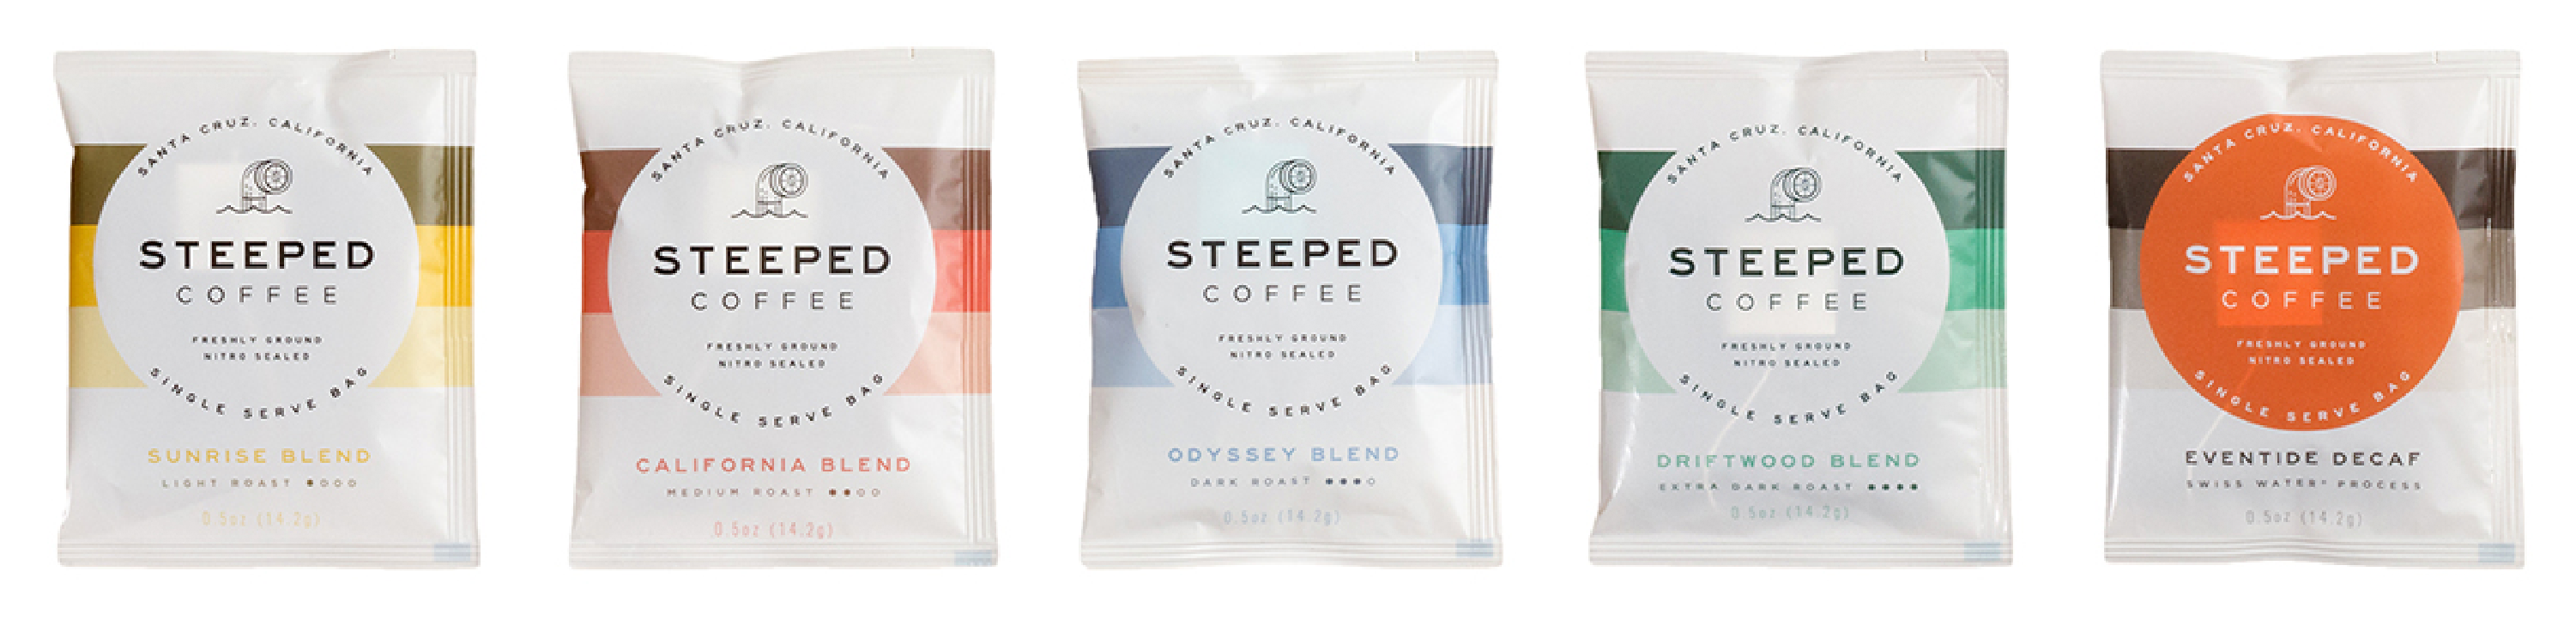 Steeped Sustainable Single Serve Coffee Packaging